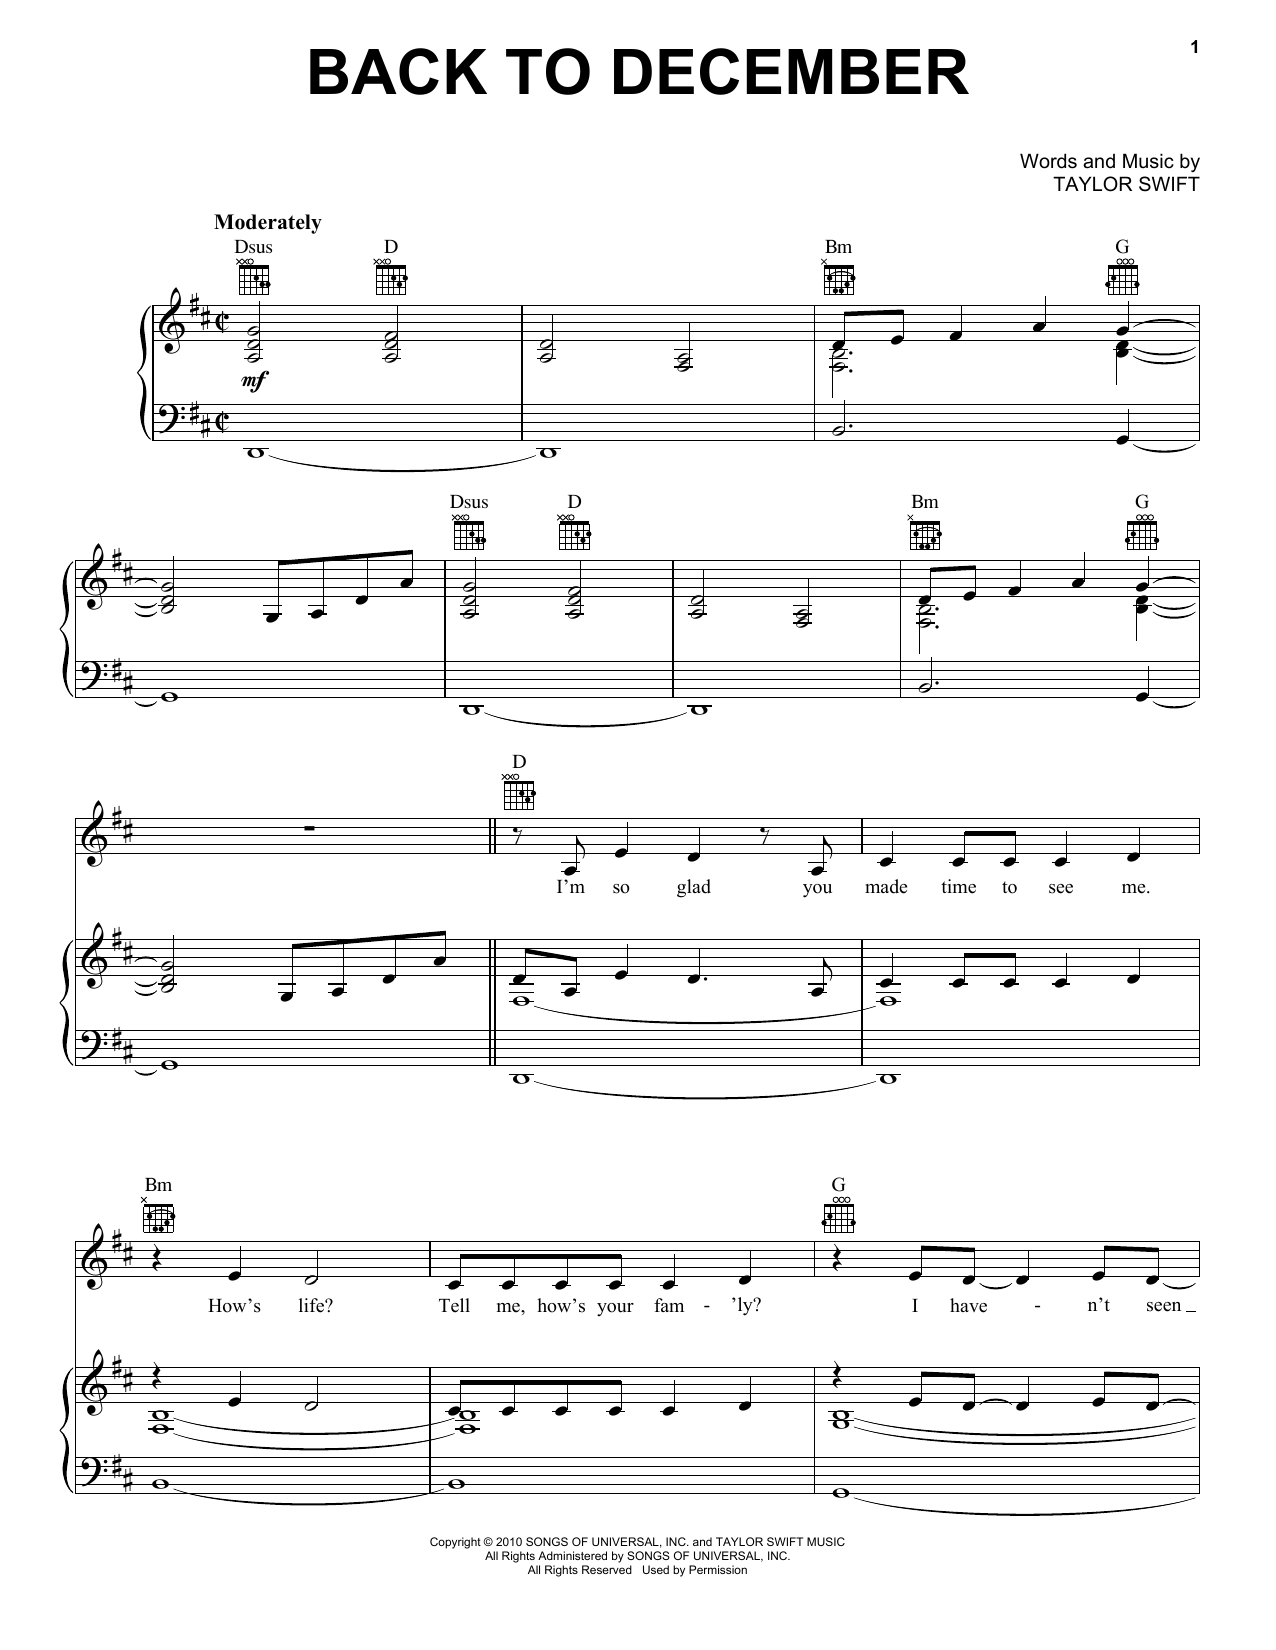 Taylor Swift Back To December sheet music preview music notes and score for Piano including 5 page(s)